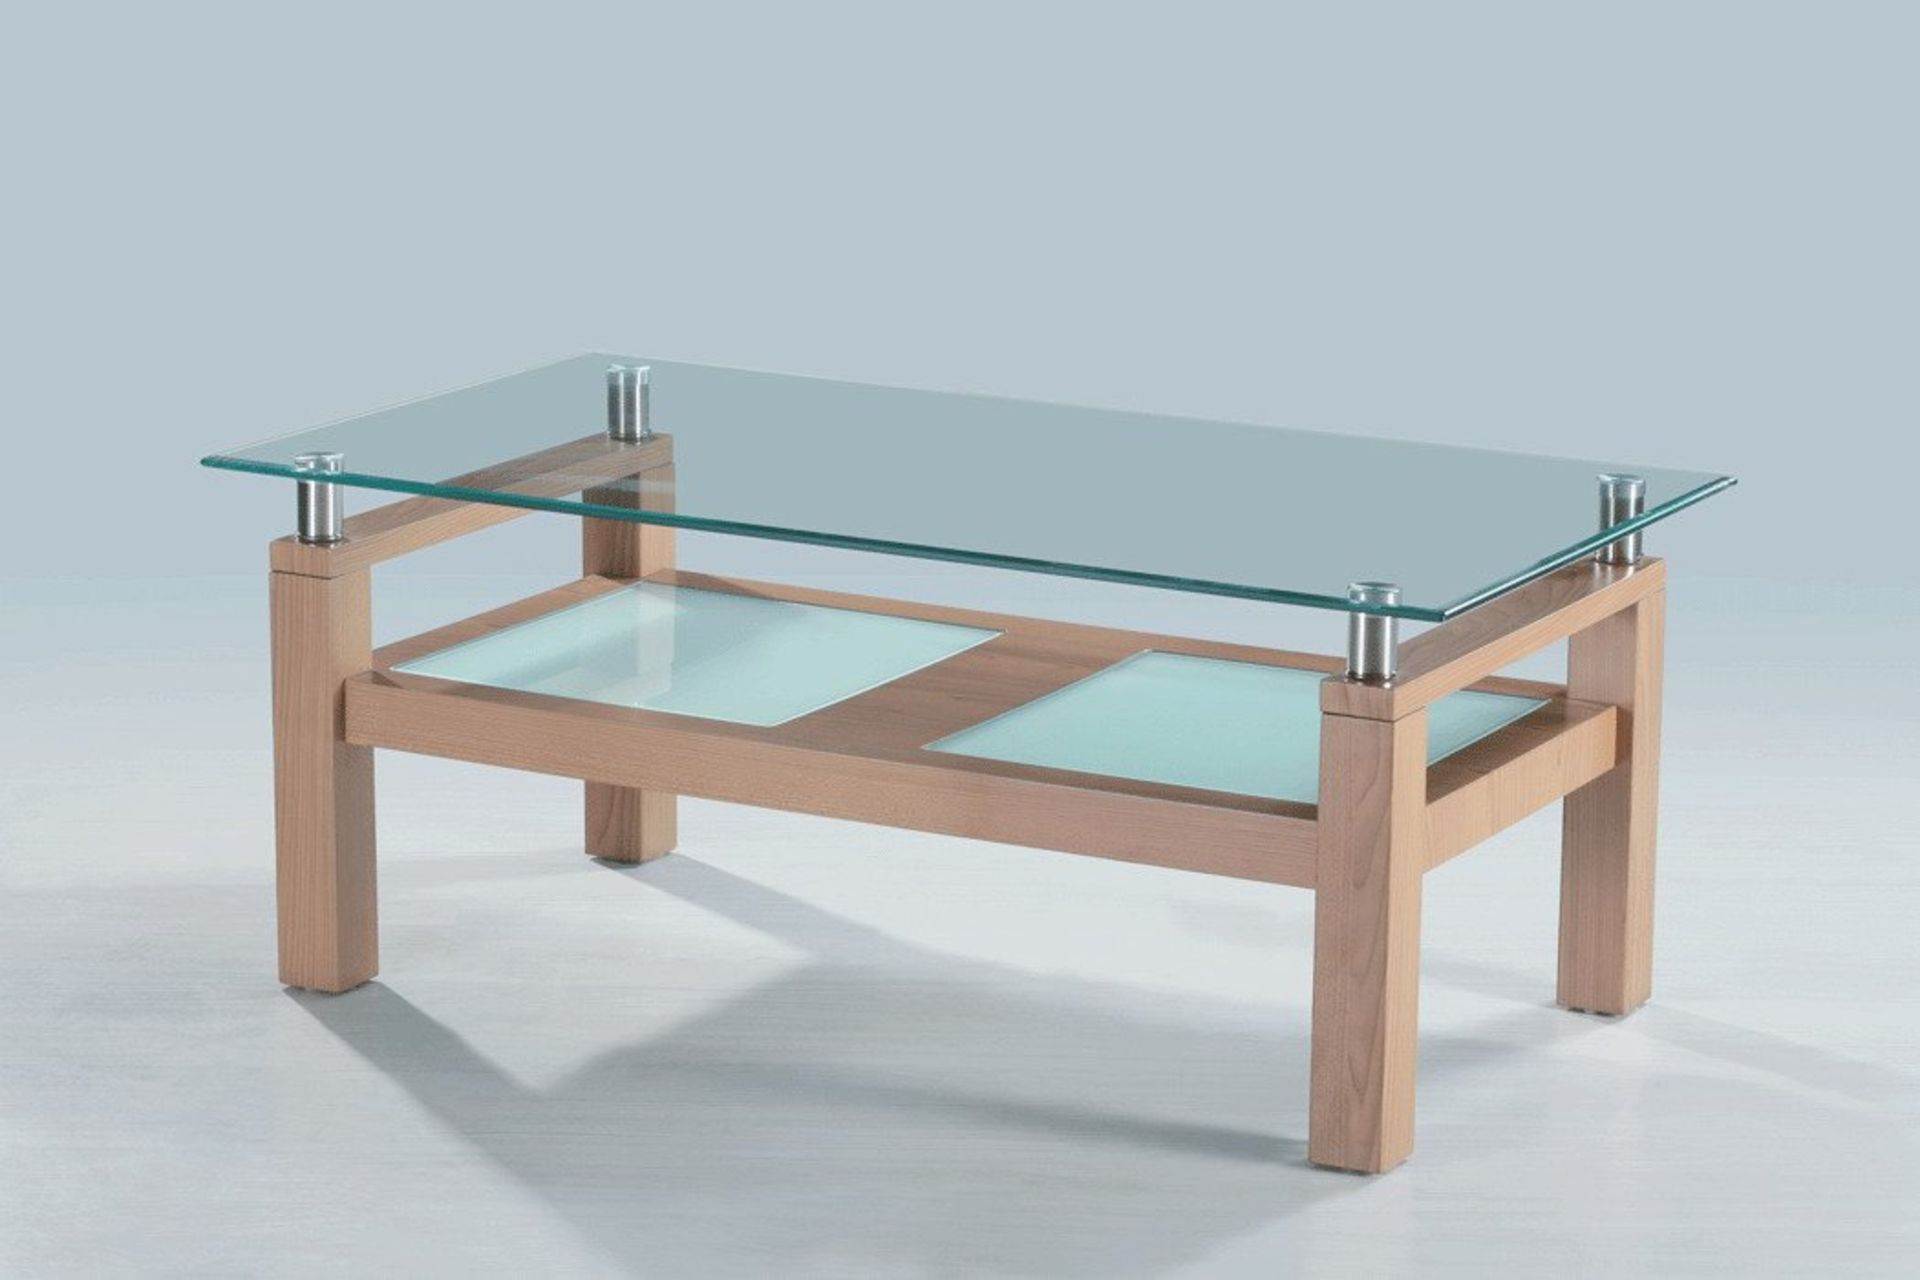 1 X BOXED BRAND NEW MODERN CLEAR TOUGHENED GLASS AND OAK COFFEE TABLE (CT648)